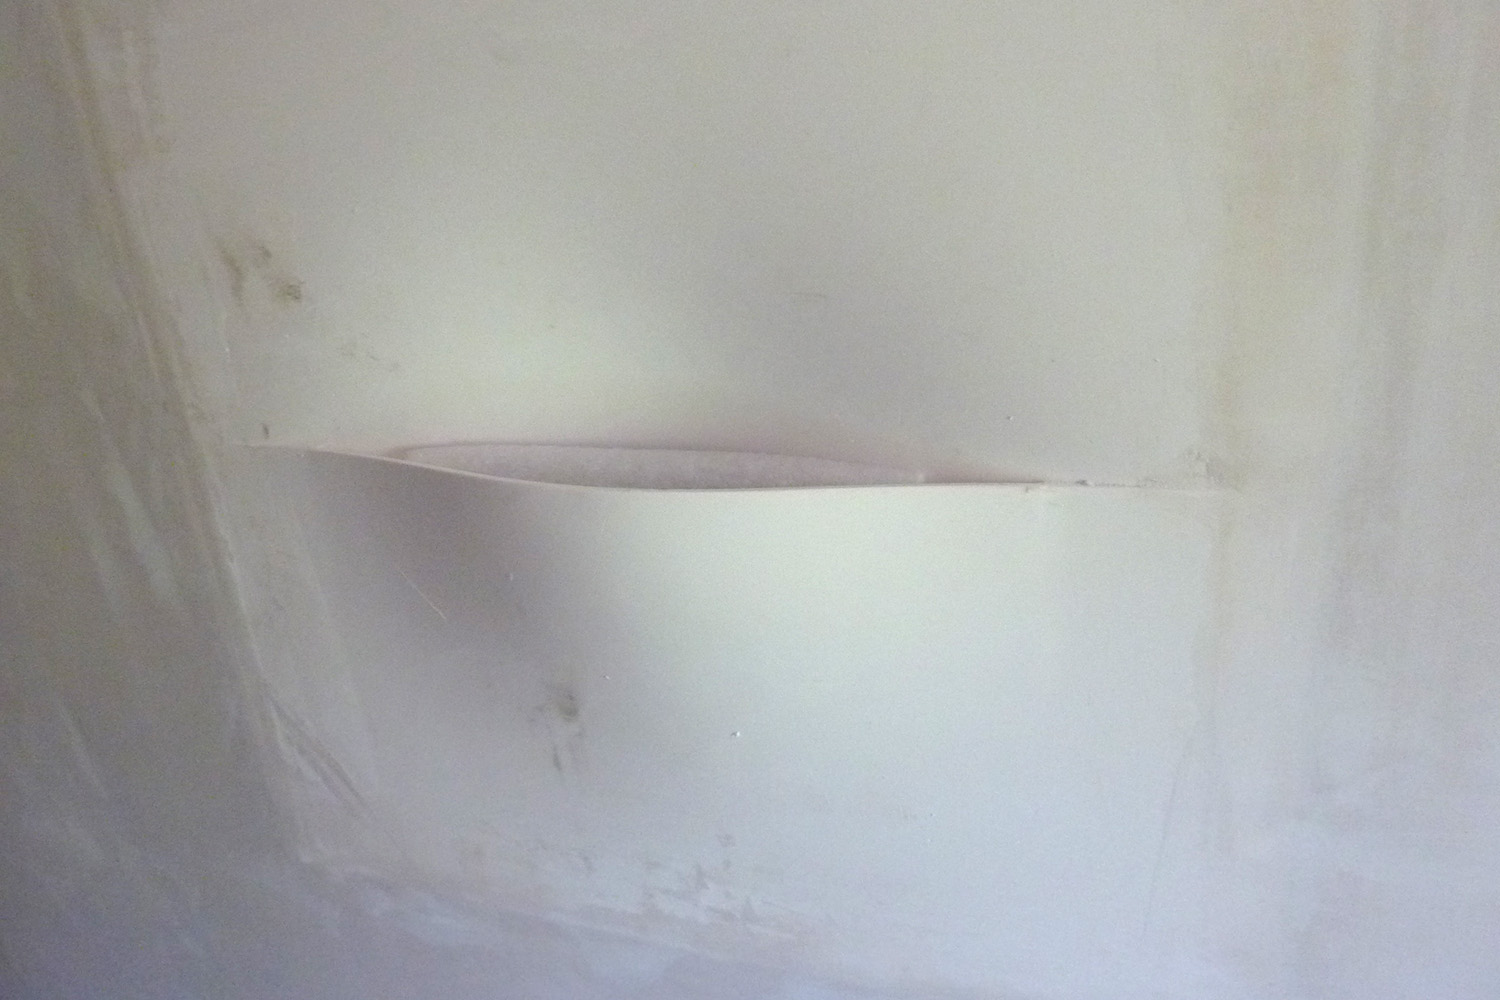 LED fixtures blend into the plaster walls